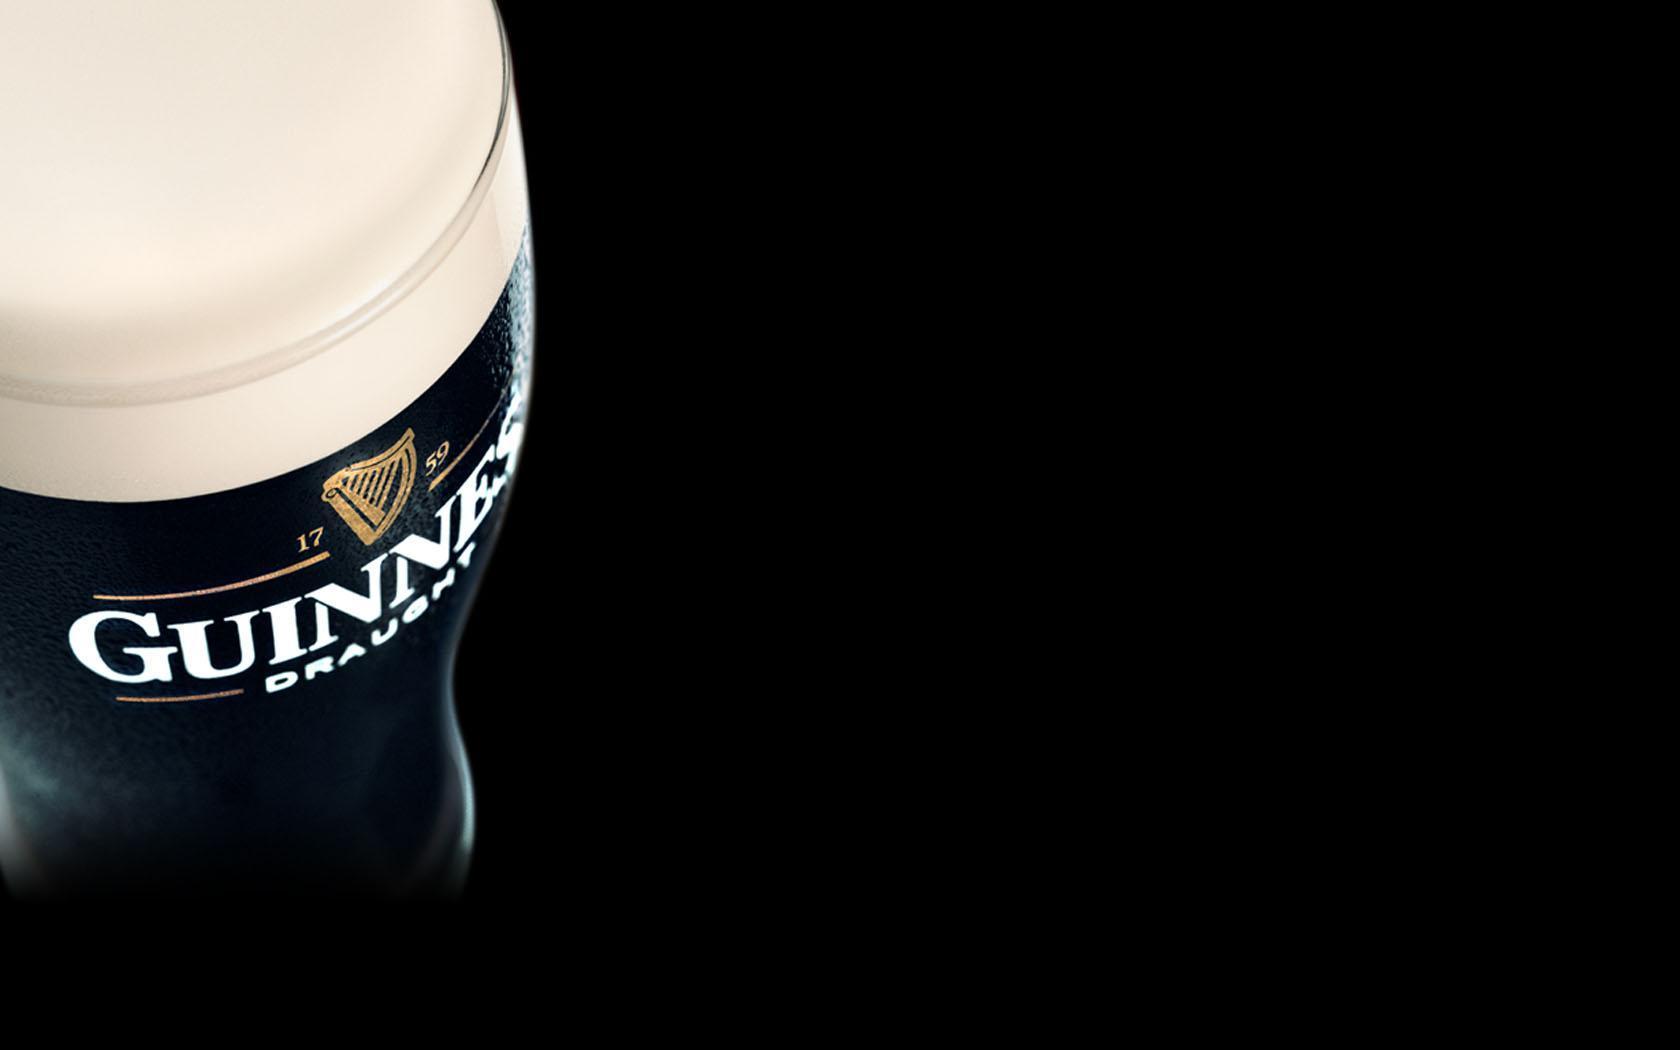 Alcohol beer, drinks, guinness, wallpapers